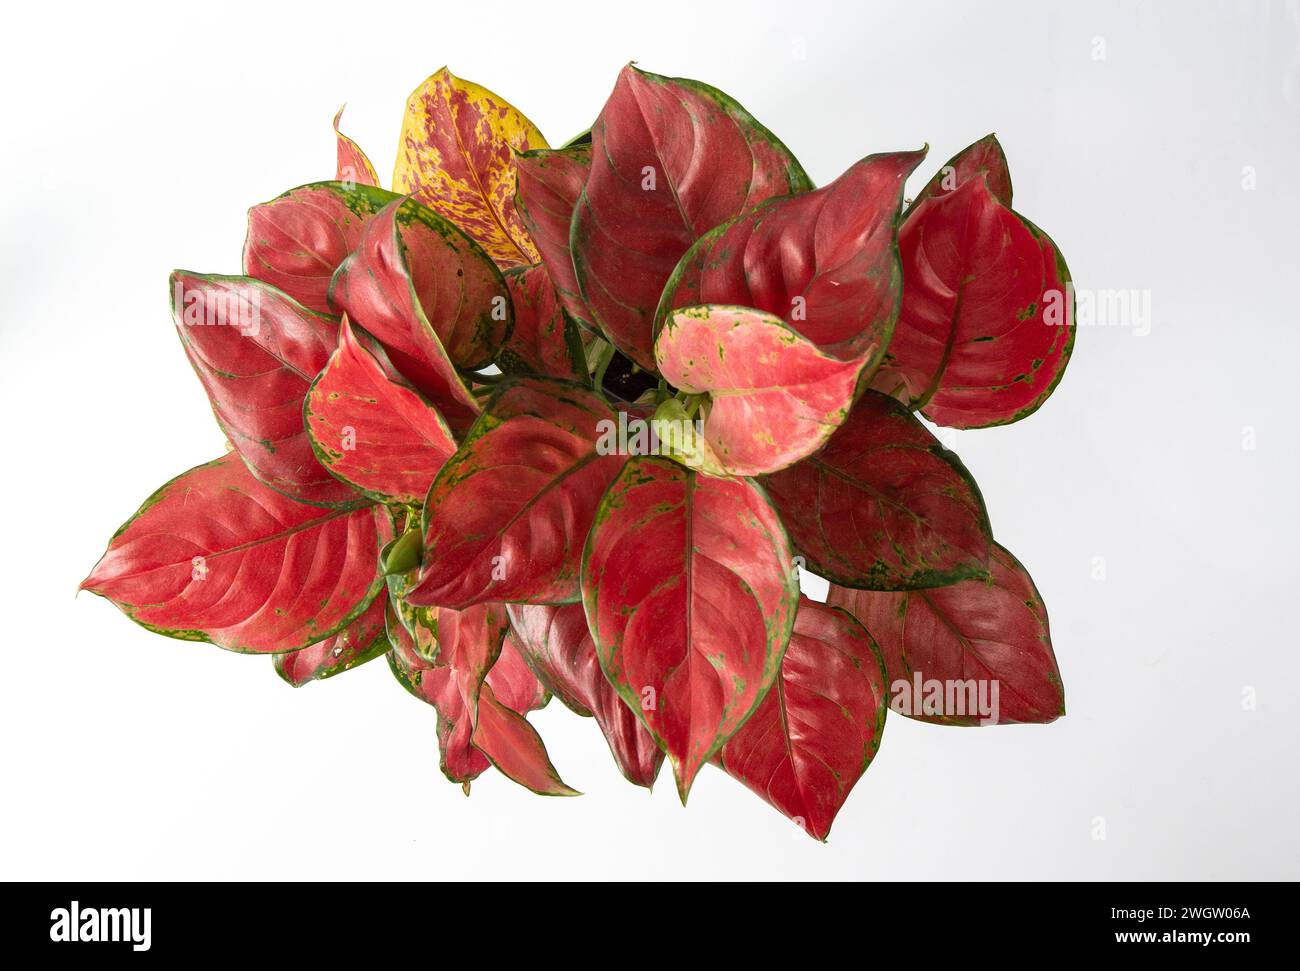 Red aglonema flower isolated on white background. Leaves with bright pink veins. Aglaonema plant Stock Photo